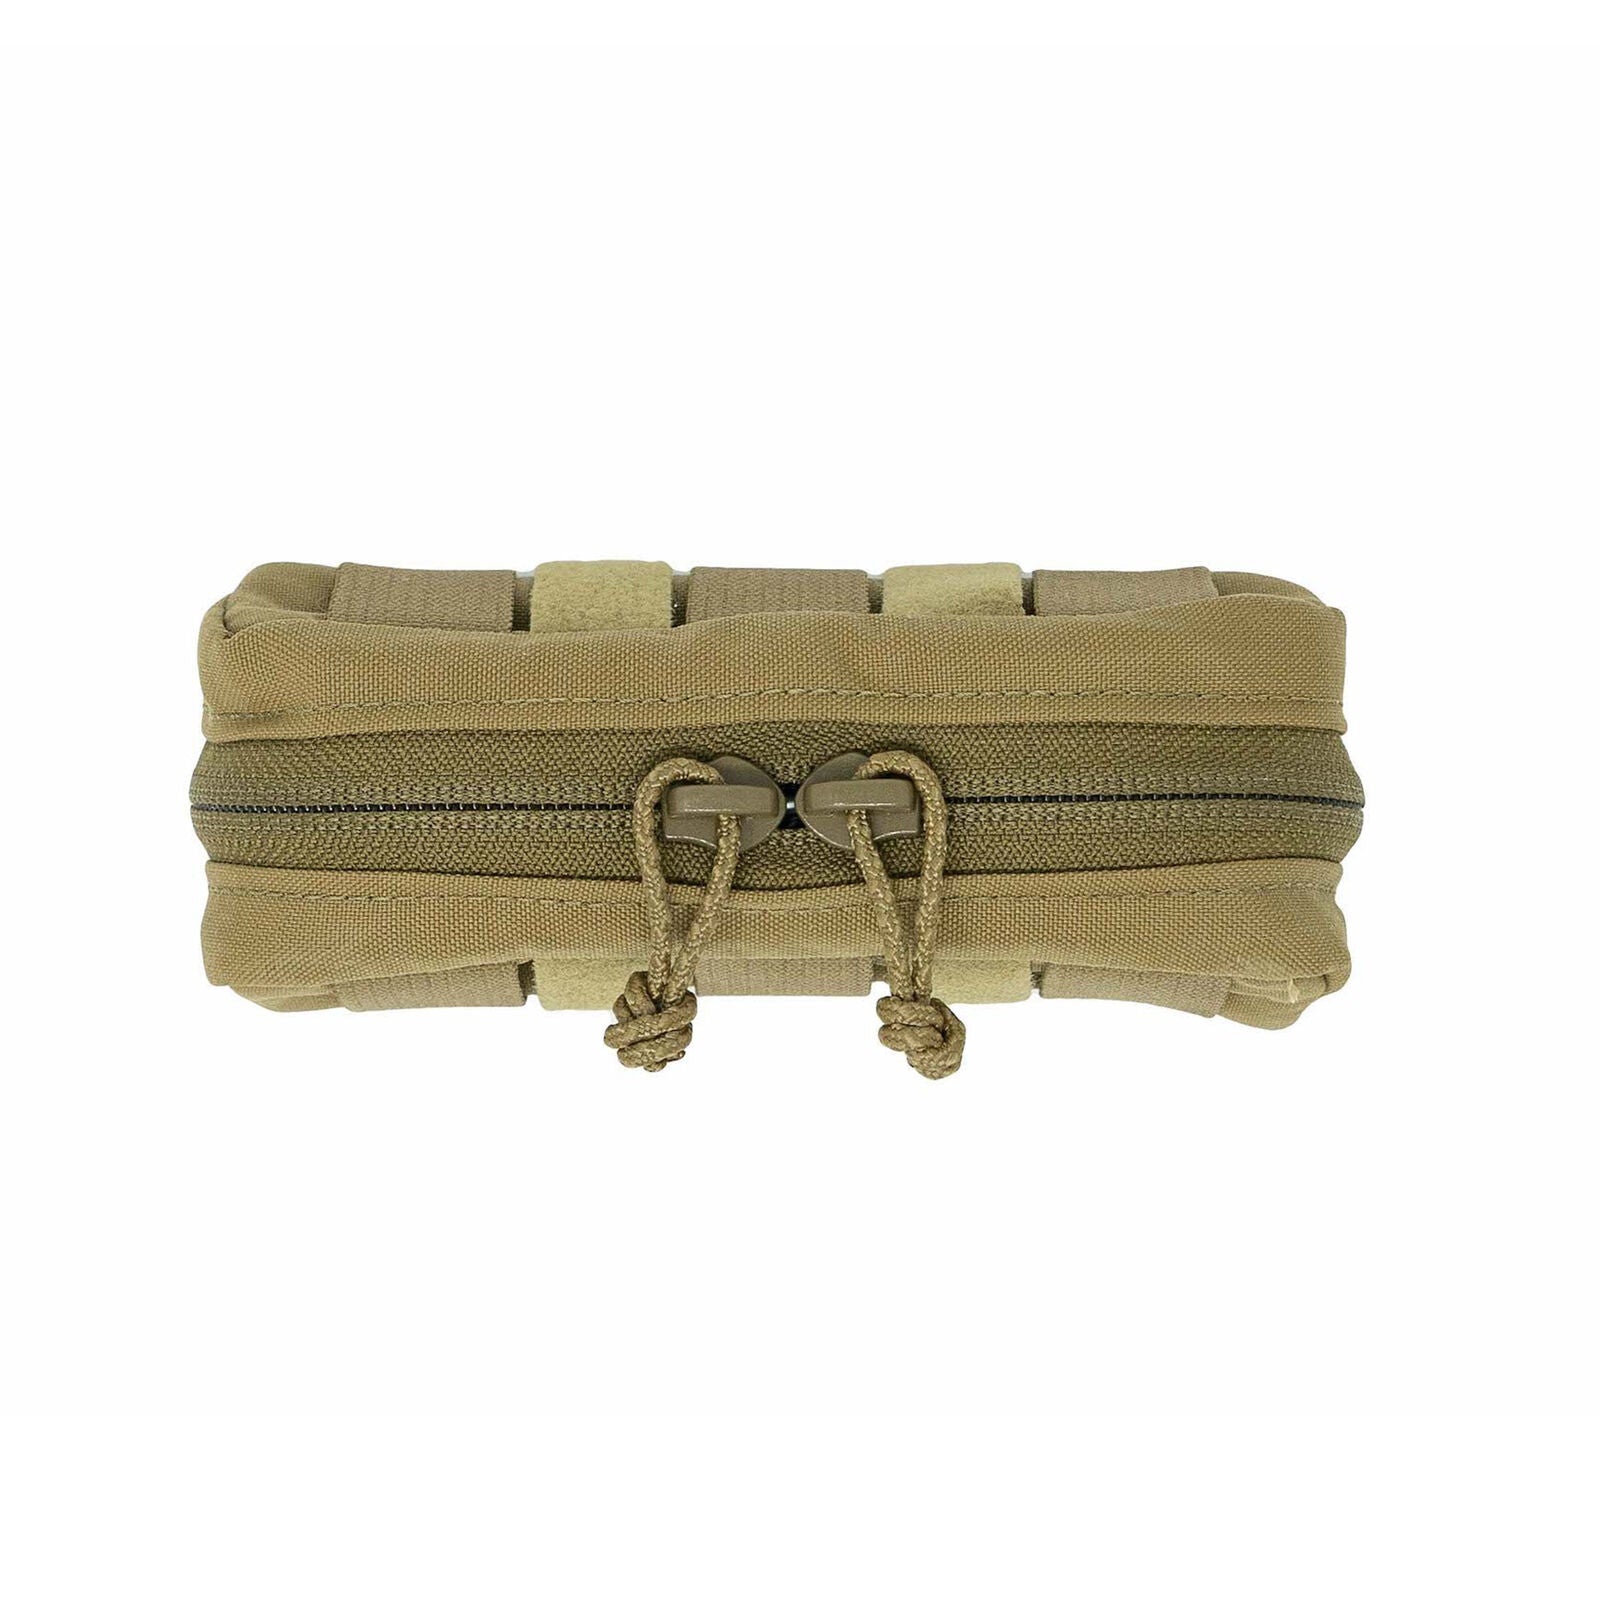 FHF Gear General Purpose Pouch Top